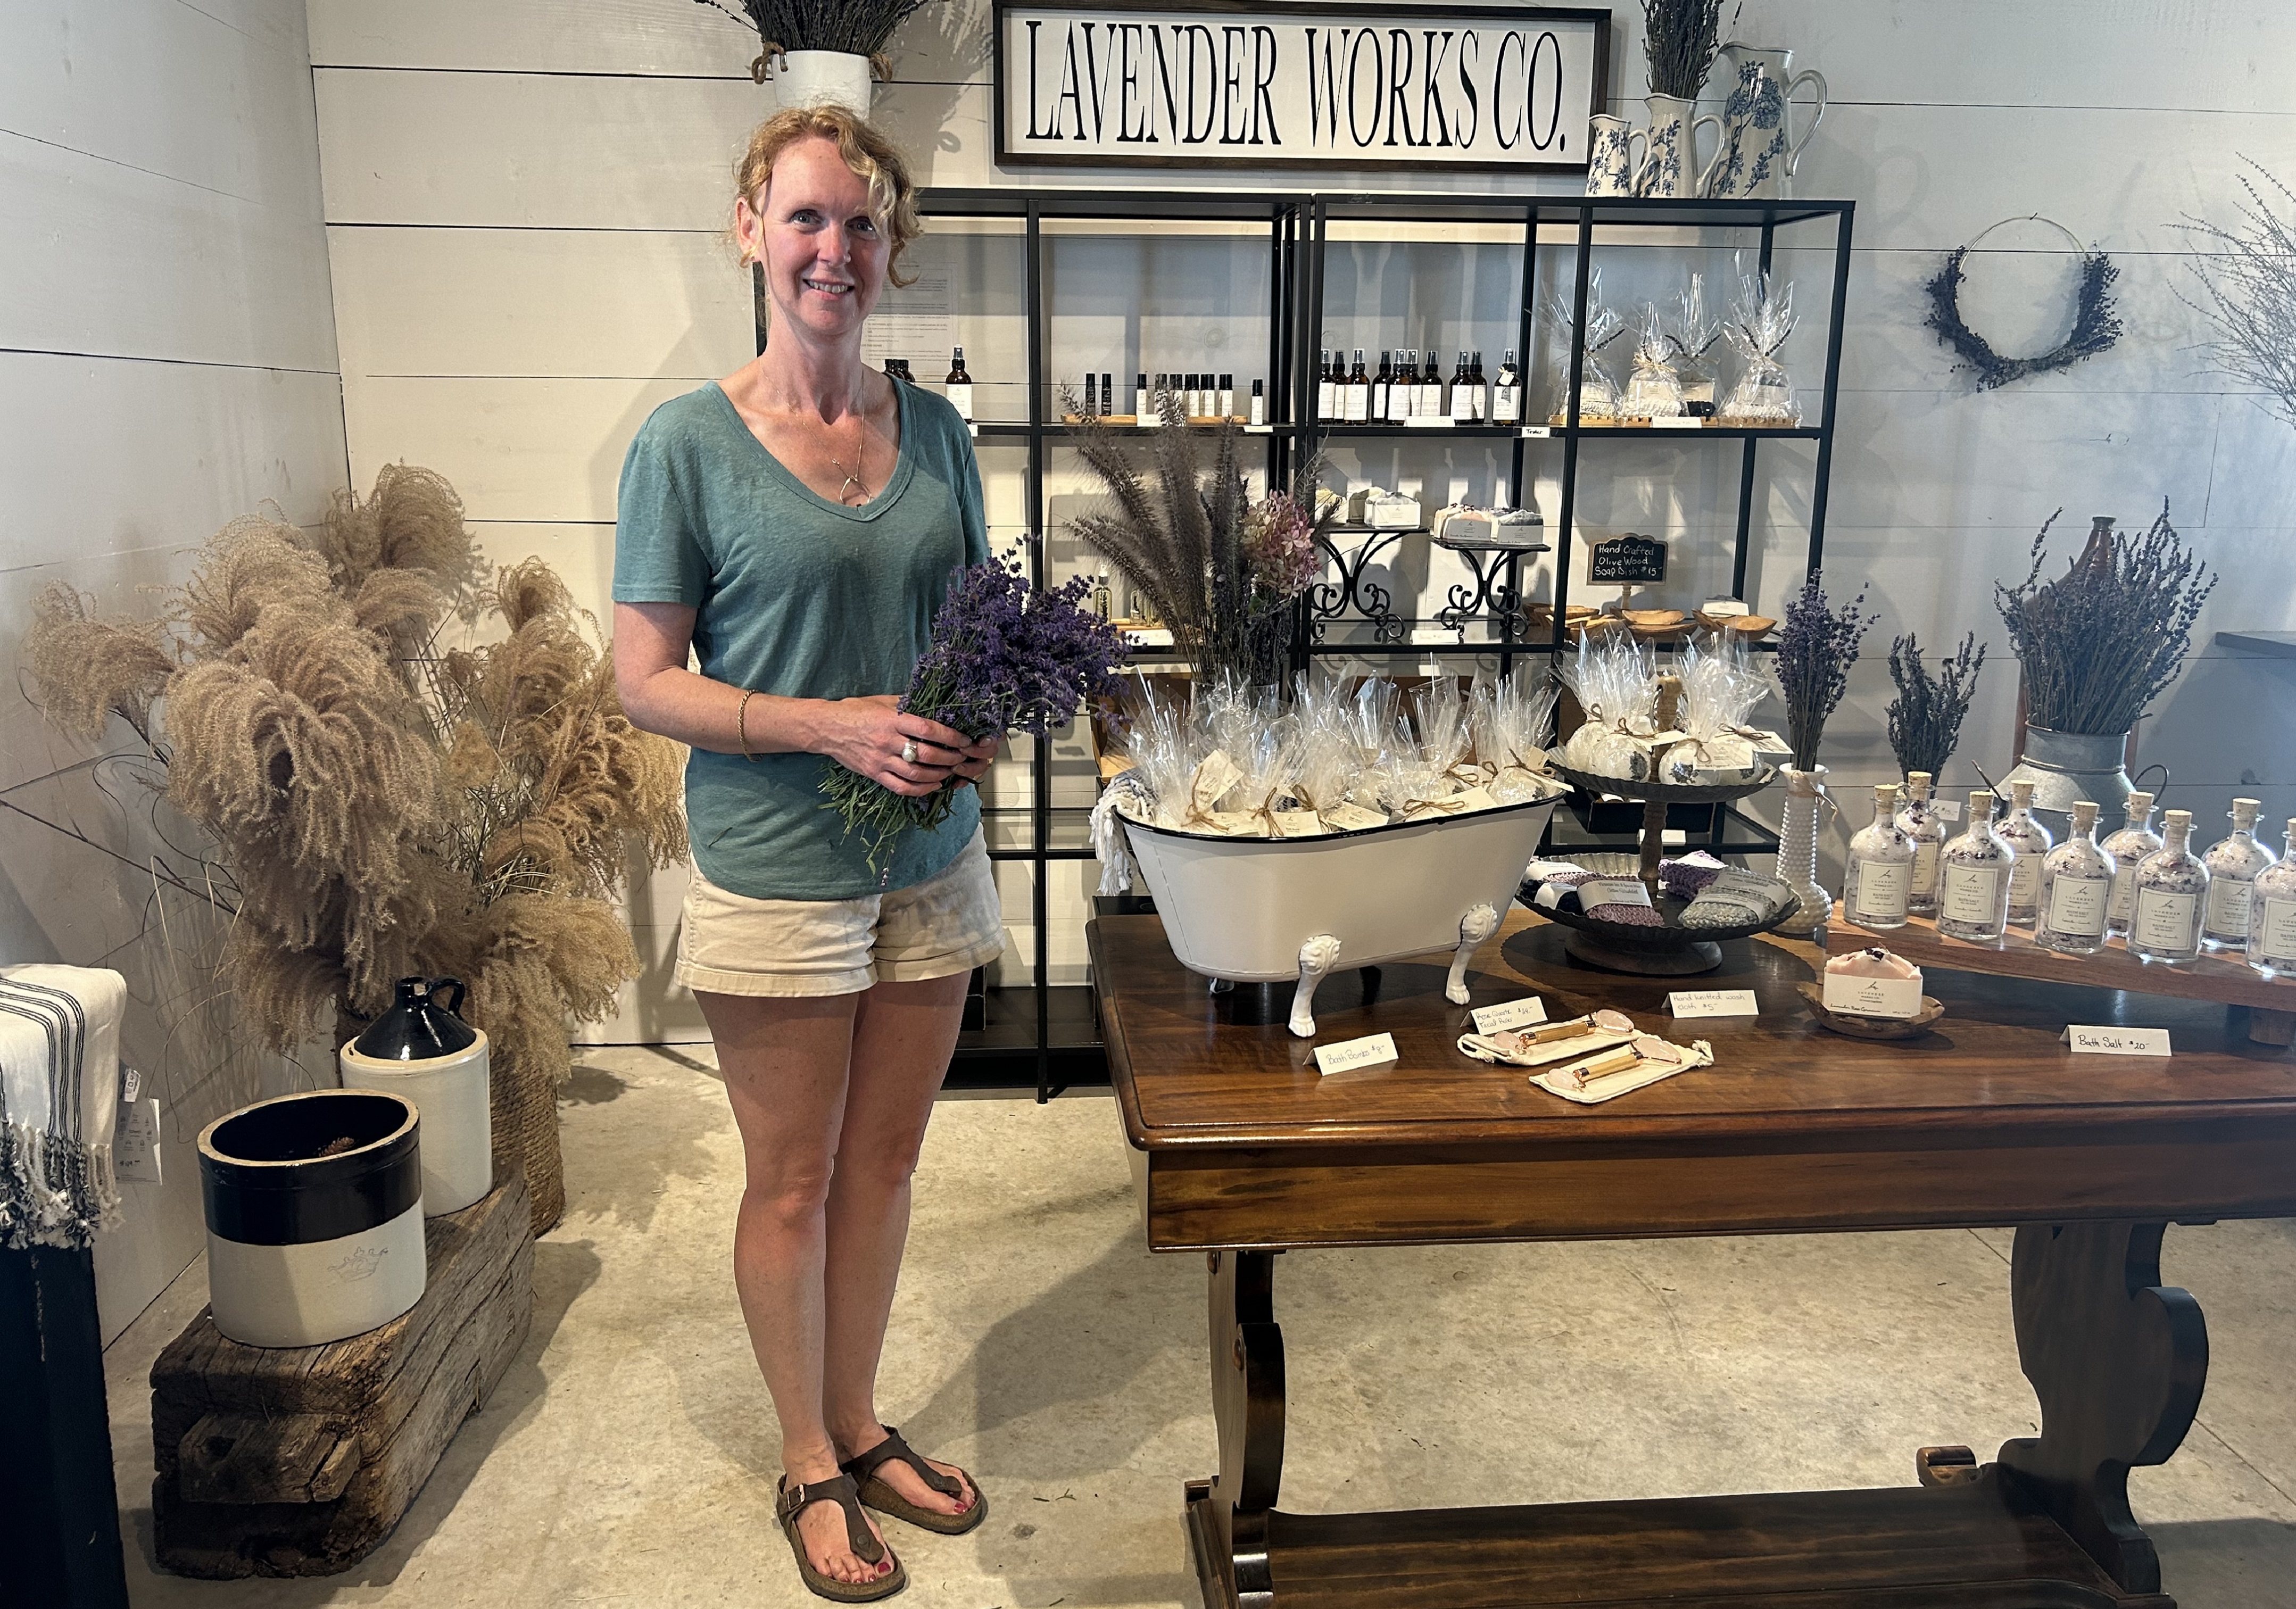 A picture of the owner of Lavender Works Co standing beside some of her lavender products.